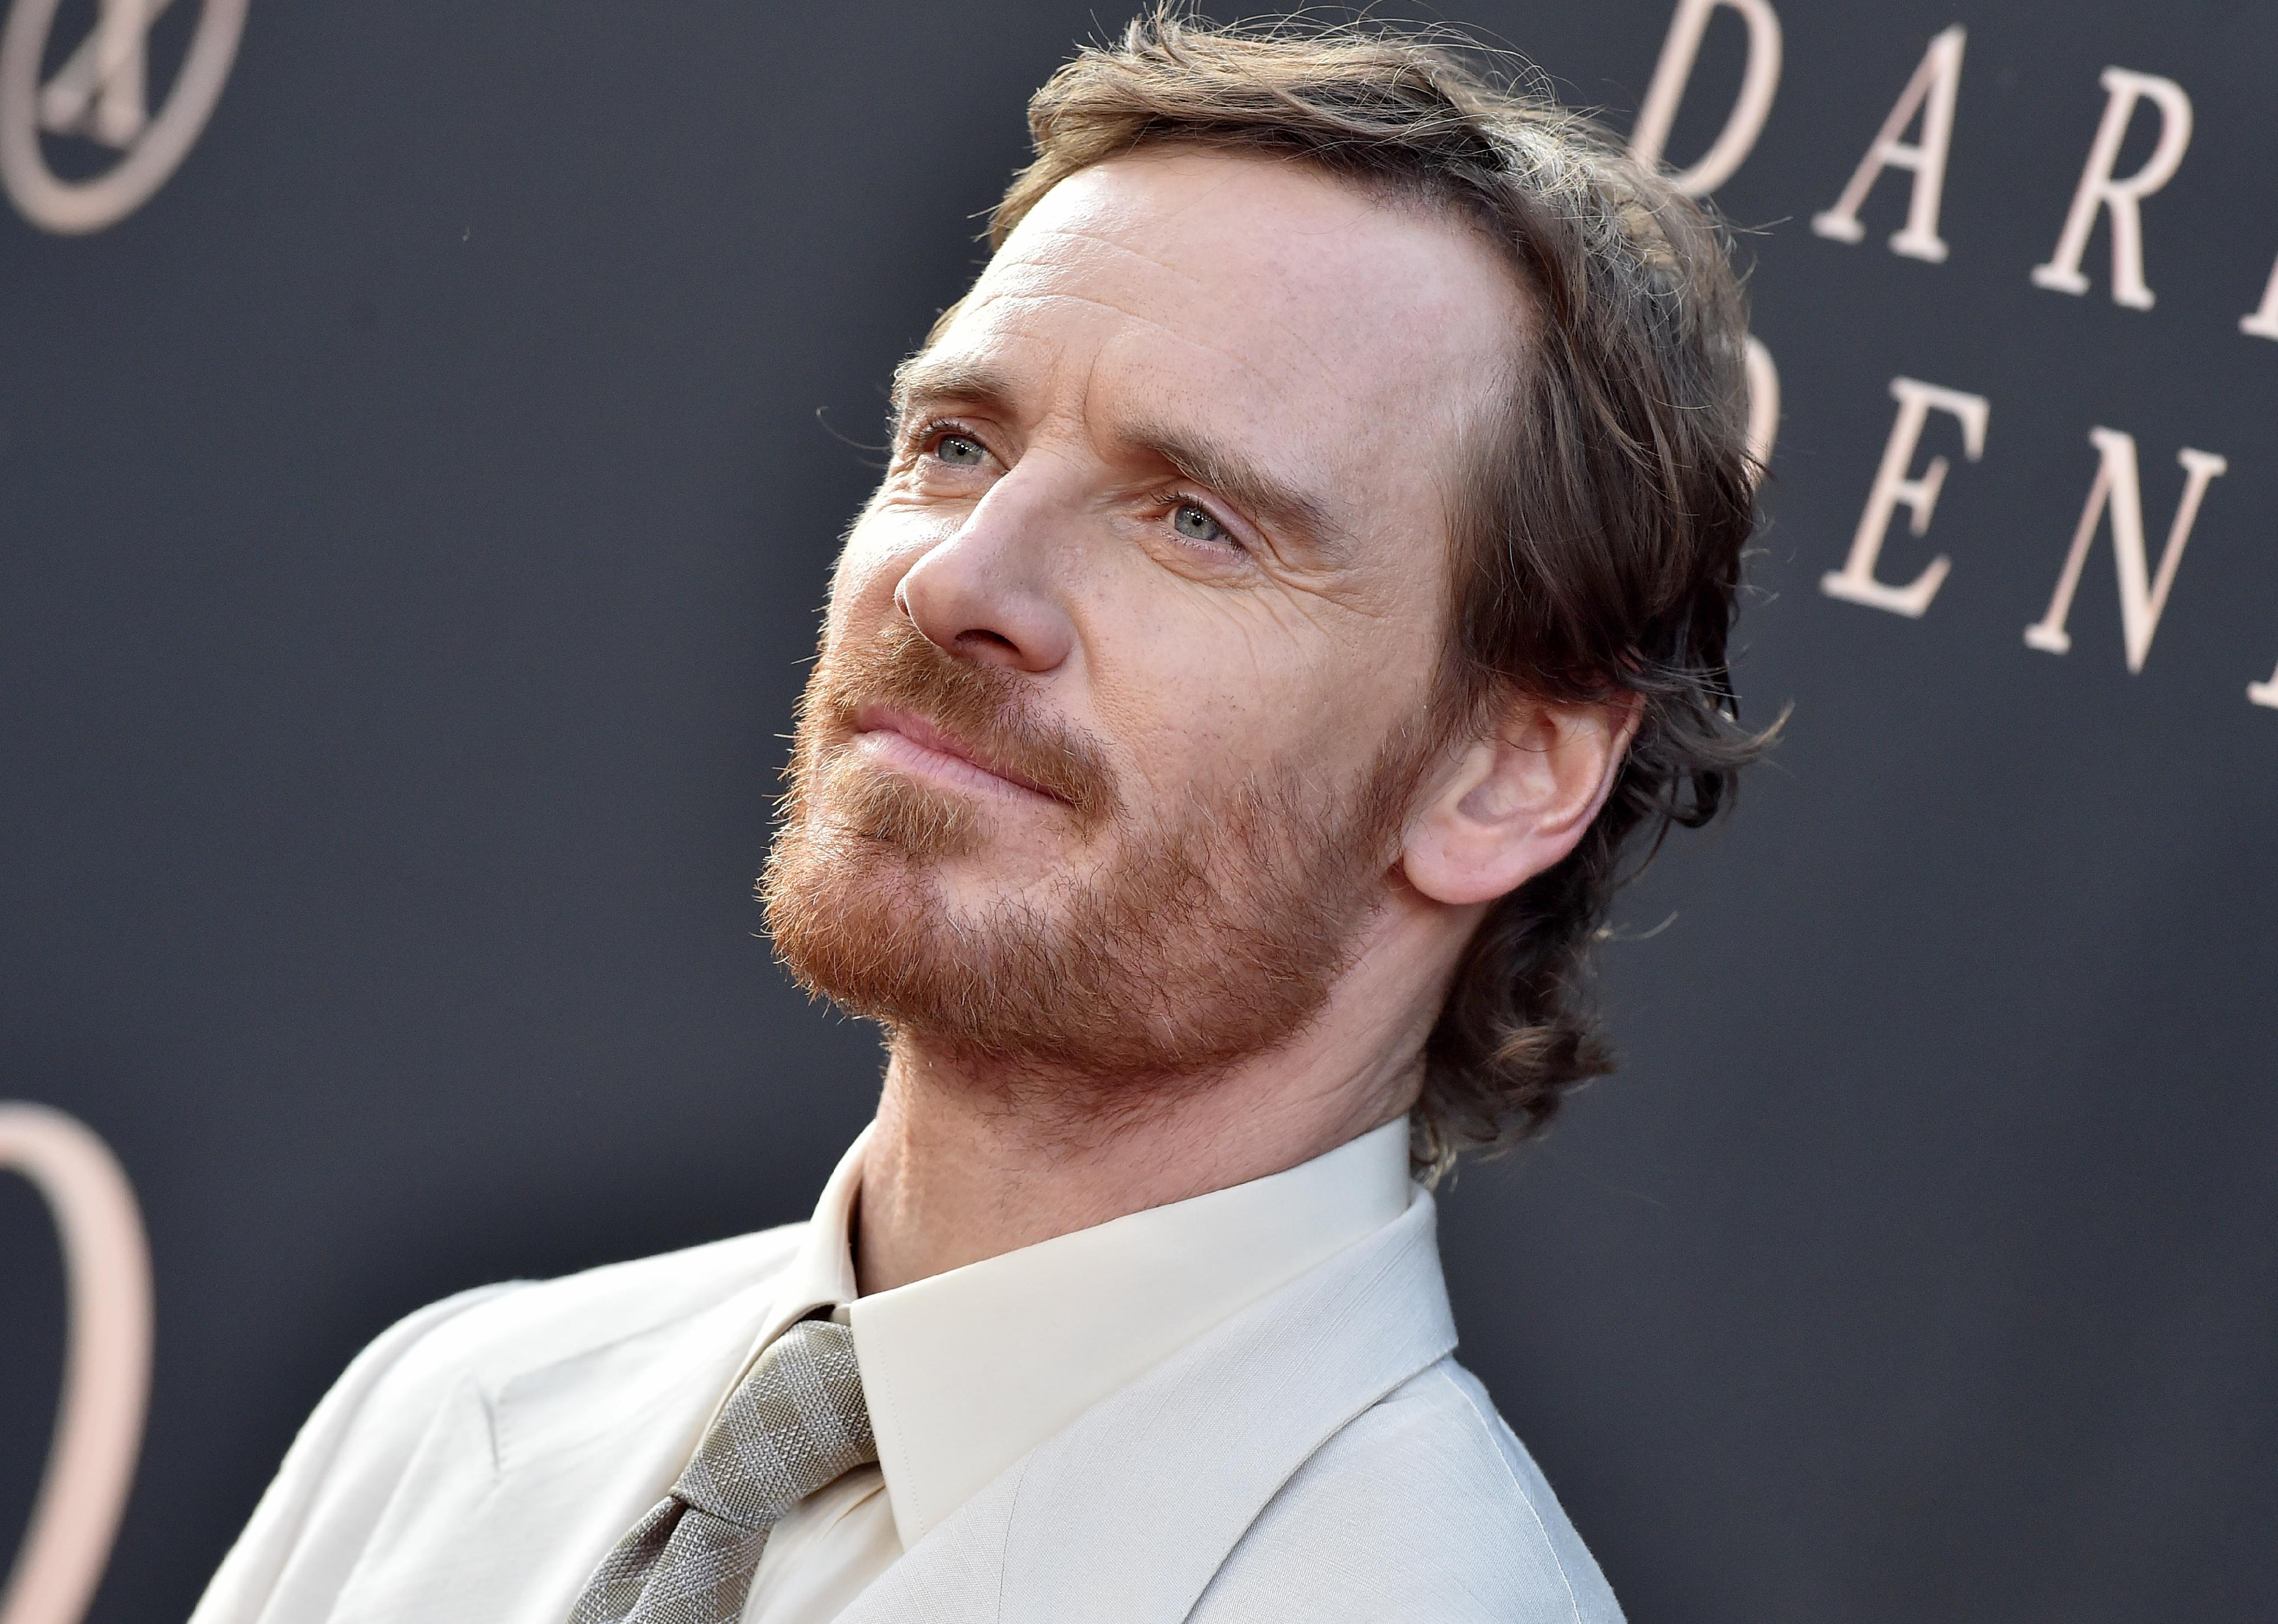 Michael Fassbender attends the premiere of 20th Century Fox